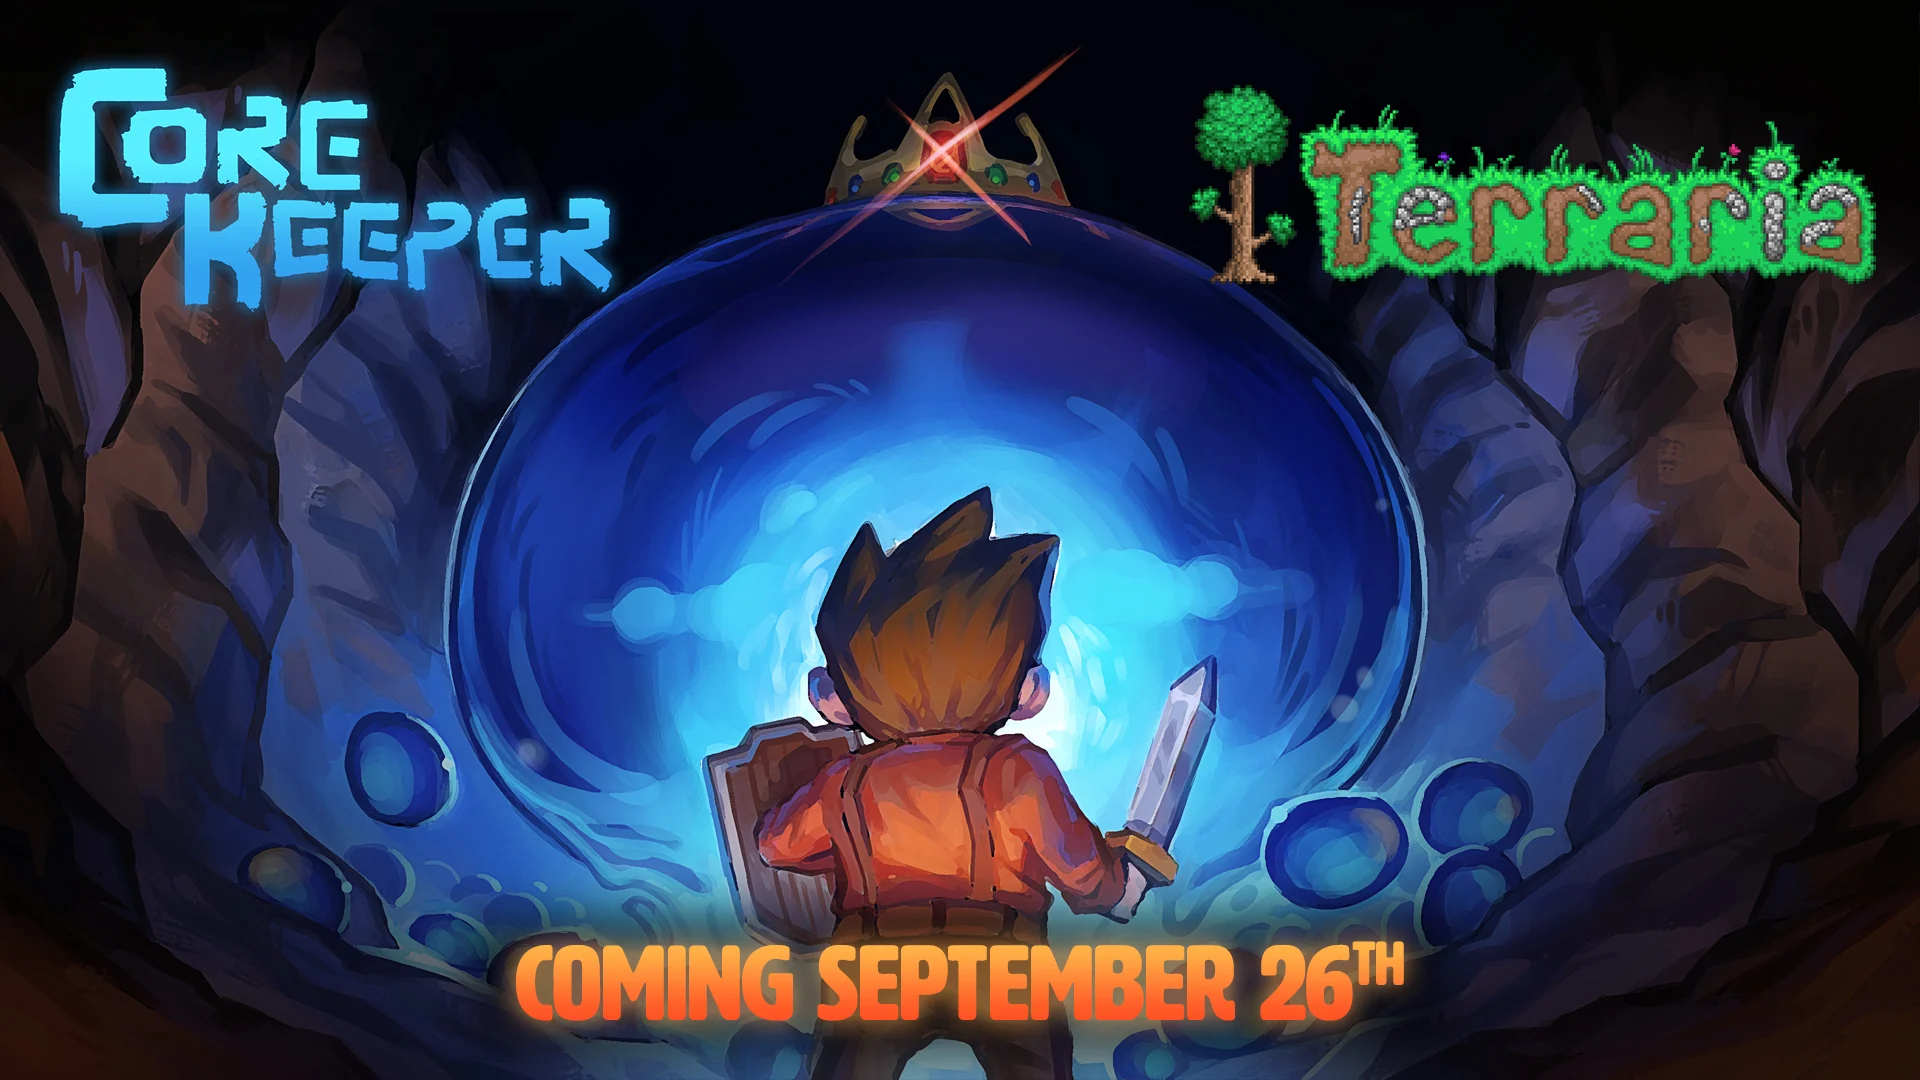 Terraria and Core Keeper Crossover Launches on September 26